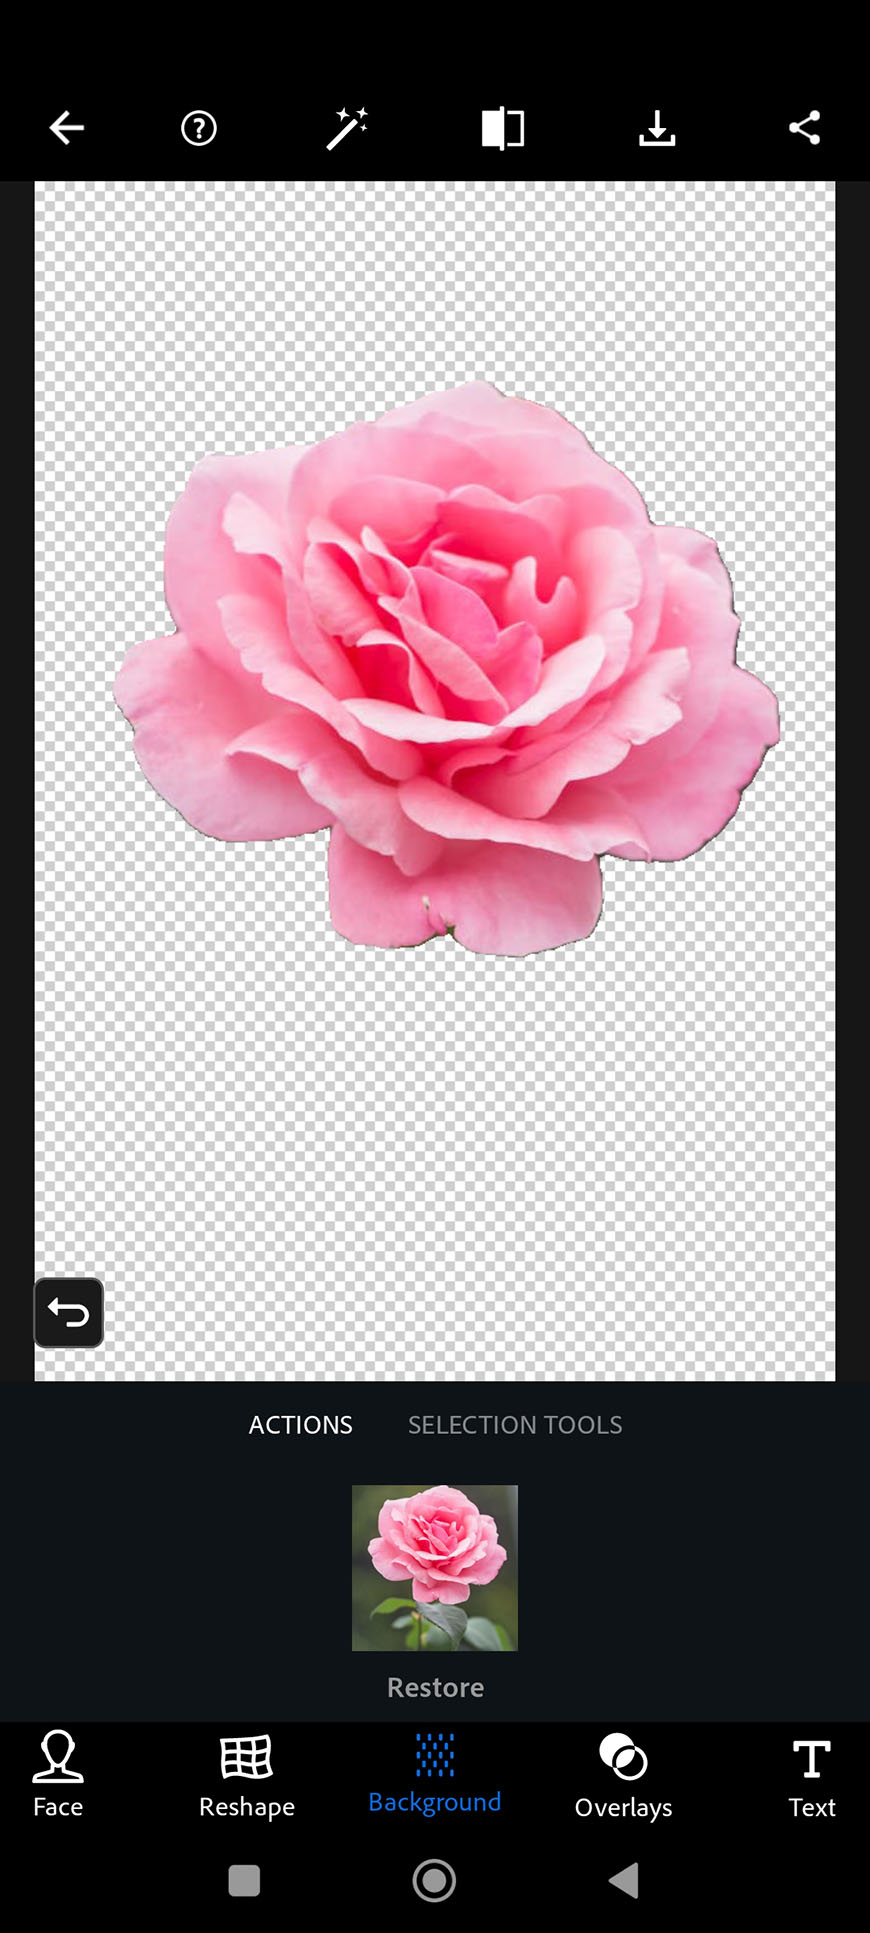 A pink rose with a transparent background being edited in a photo manipulation app.